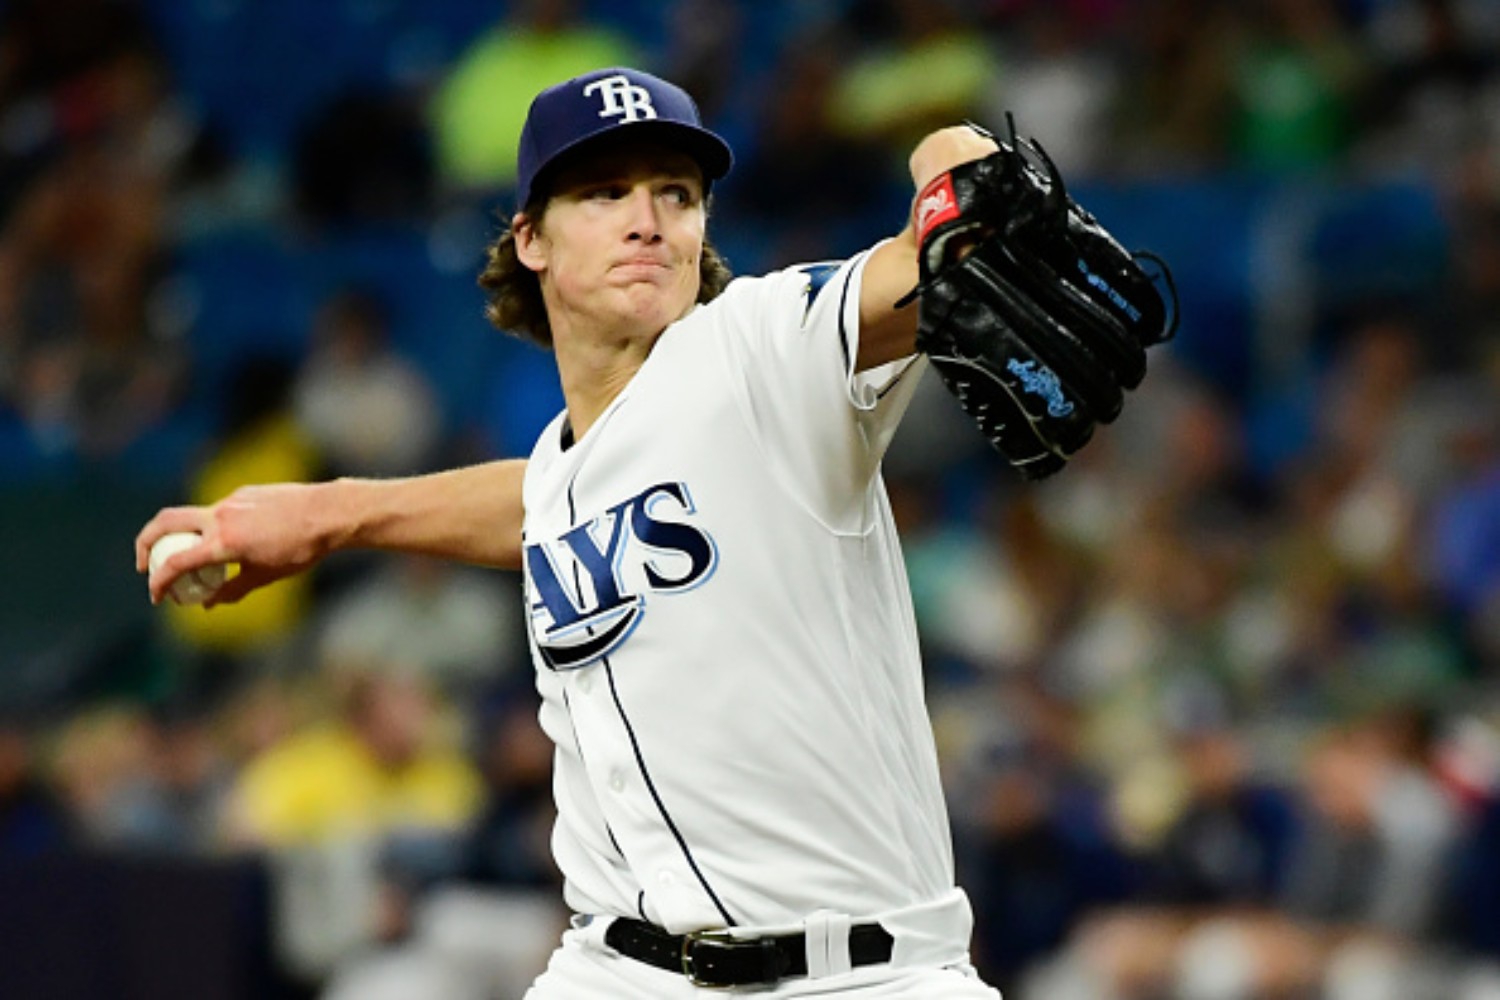 Rays Star Pitcher Tyler Glasnow's Career Took a Turn For the Better